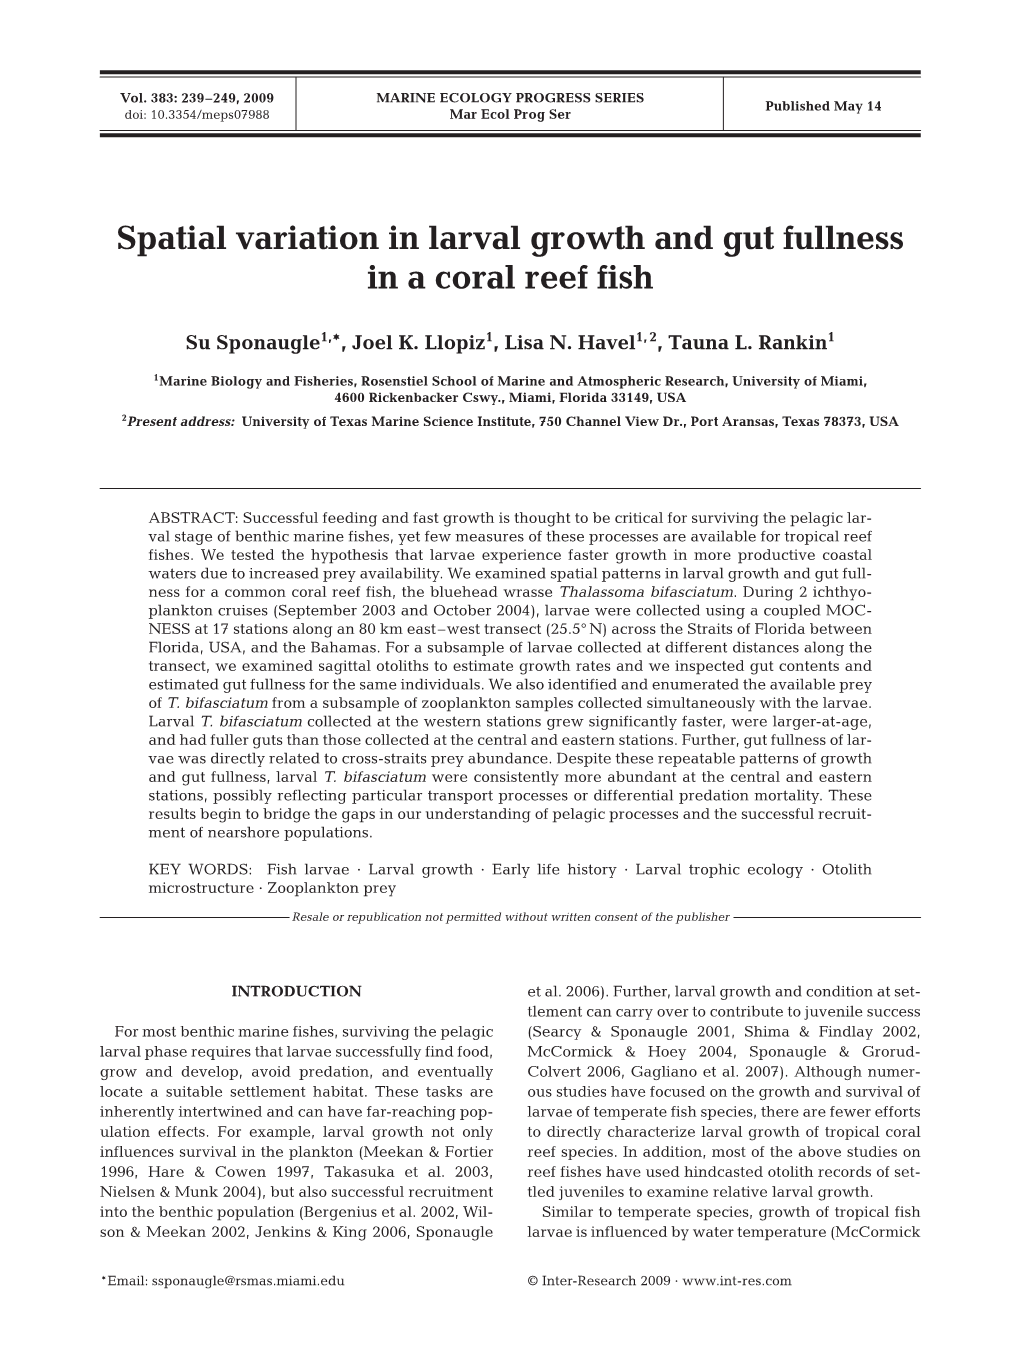 Spatial Variation in Larval Growth and Gut Fullness in a Coral Reef Fish